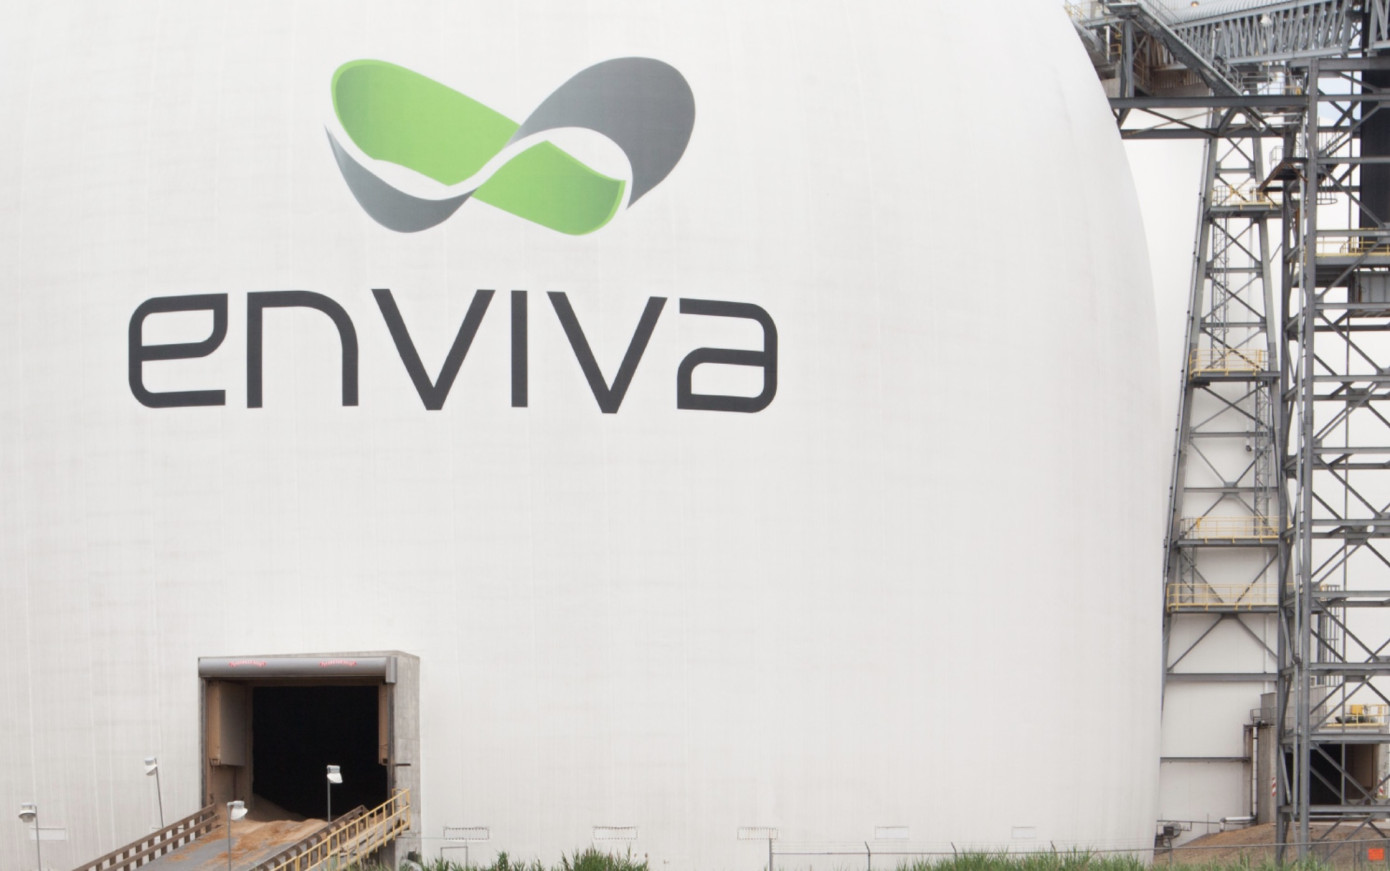 Enviva announces Restructuring Agreements amid Chapter 11 proceedings